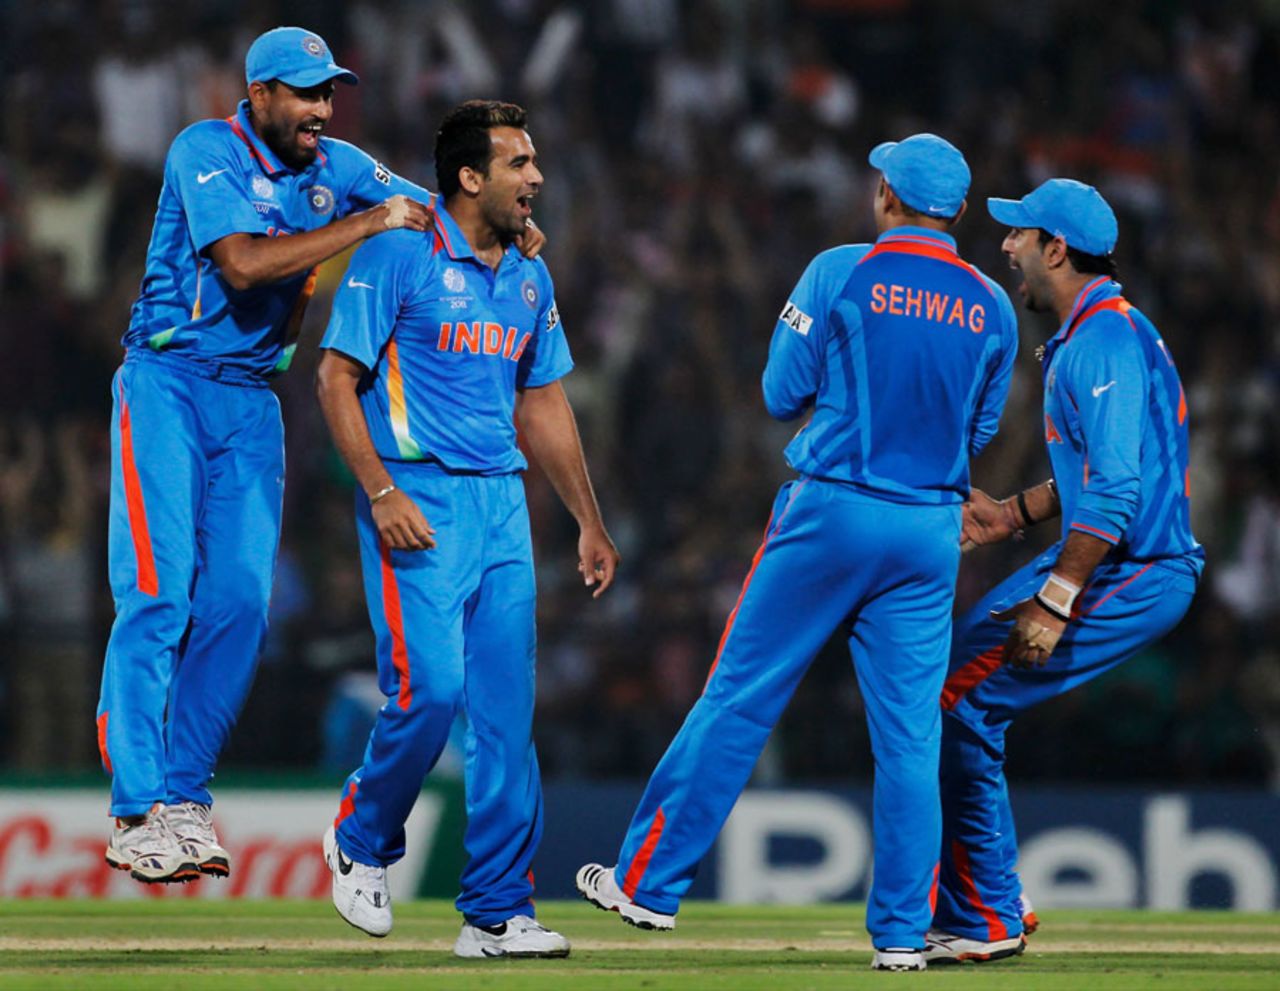 Zaheer Khan celebrates the wicket of Graeme Smith, India v South Africa, Group B, World Cup, Nagpur, March 12, 2011